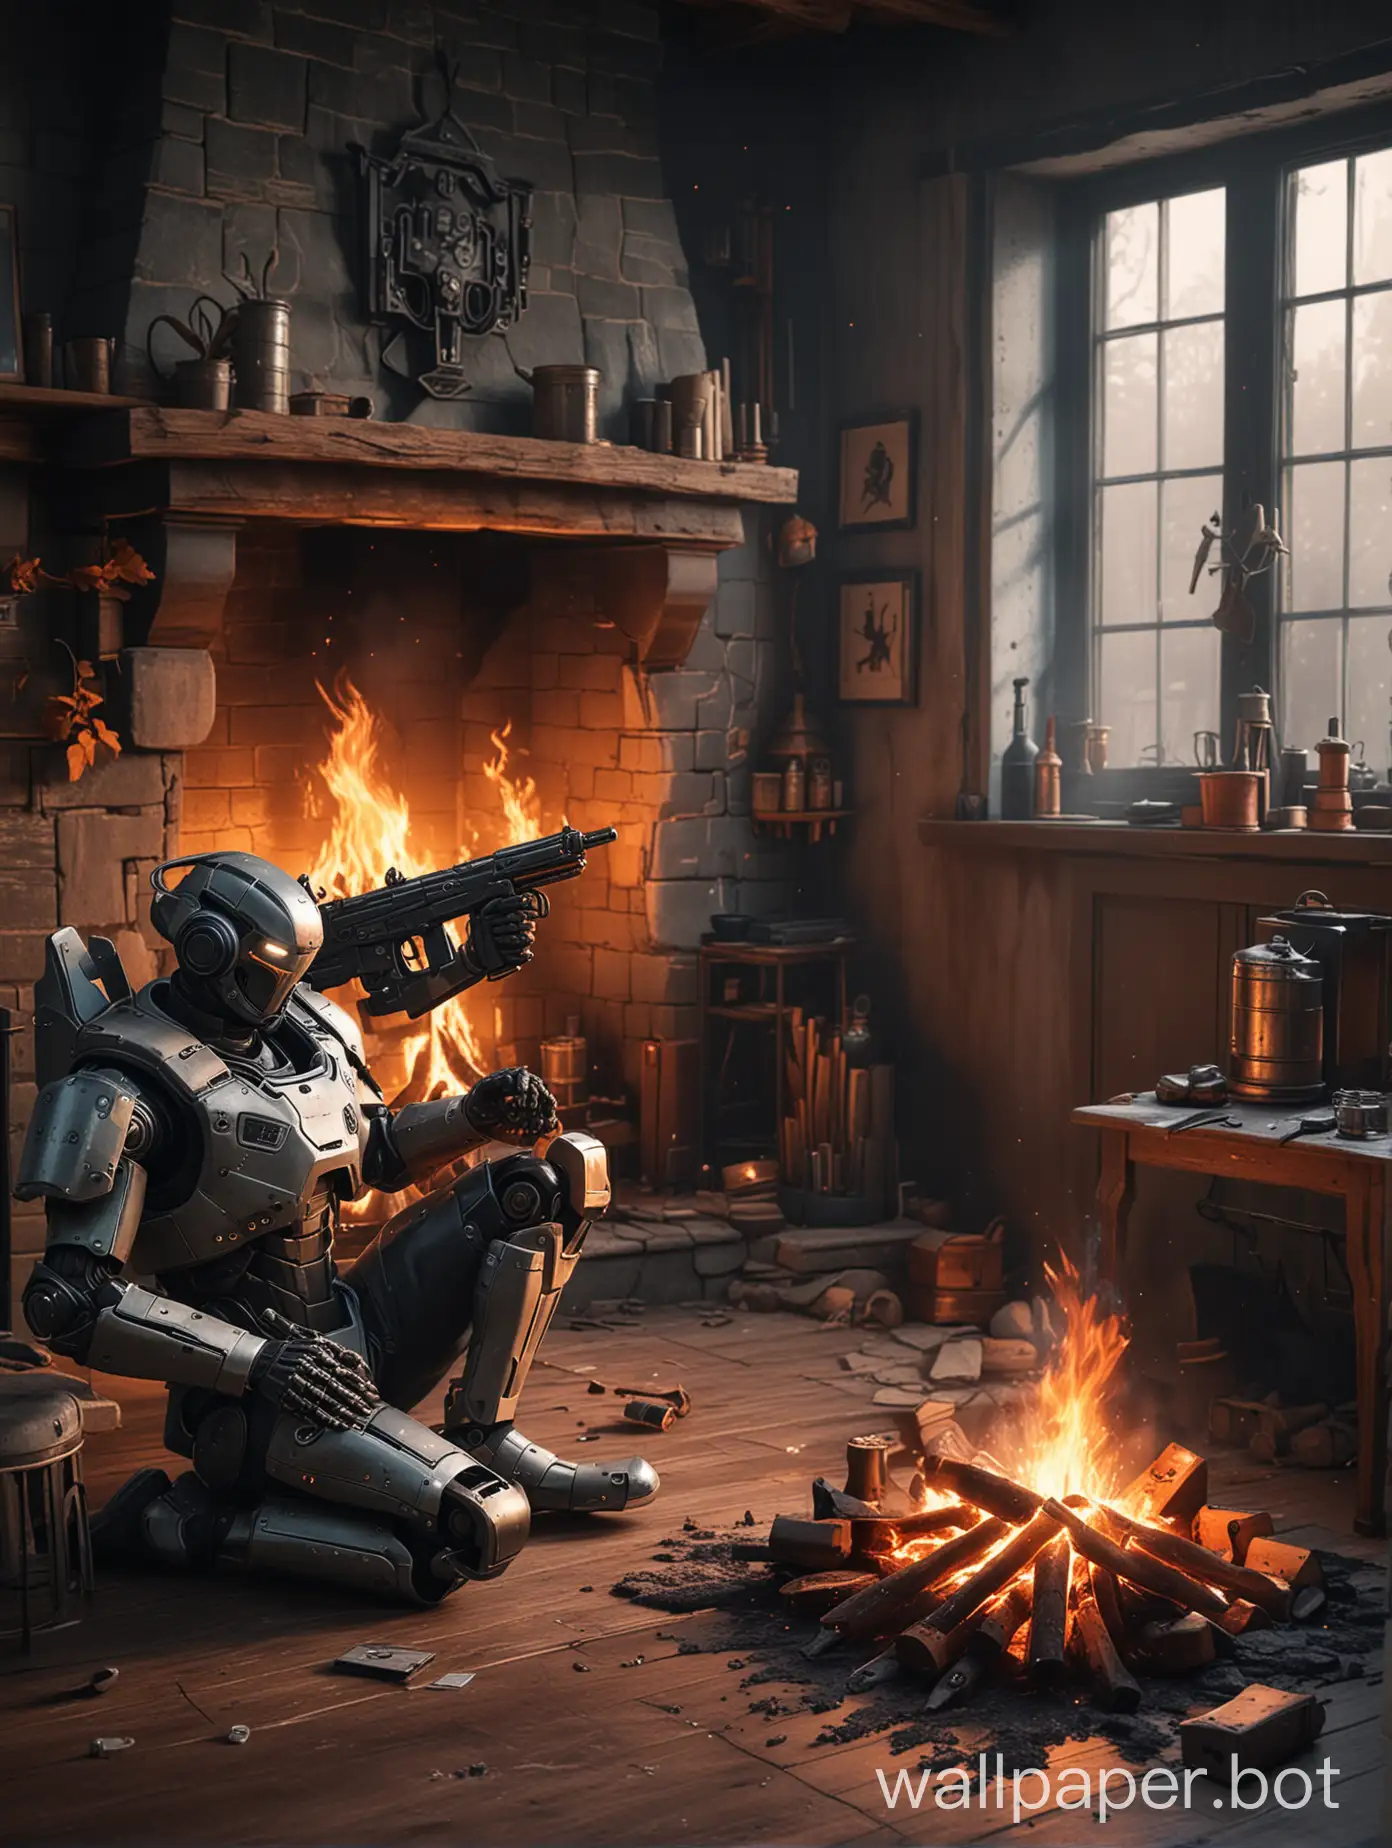 A cozy fire place, with a valorant character sitting in the corner, with his gun in hand, in a duel with a creepy robot across the fireplace